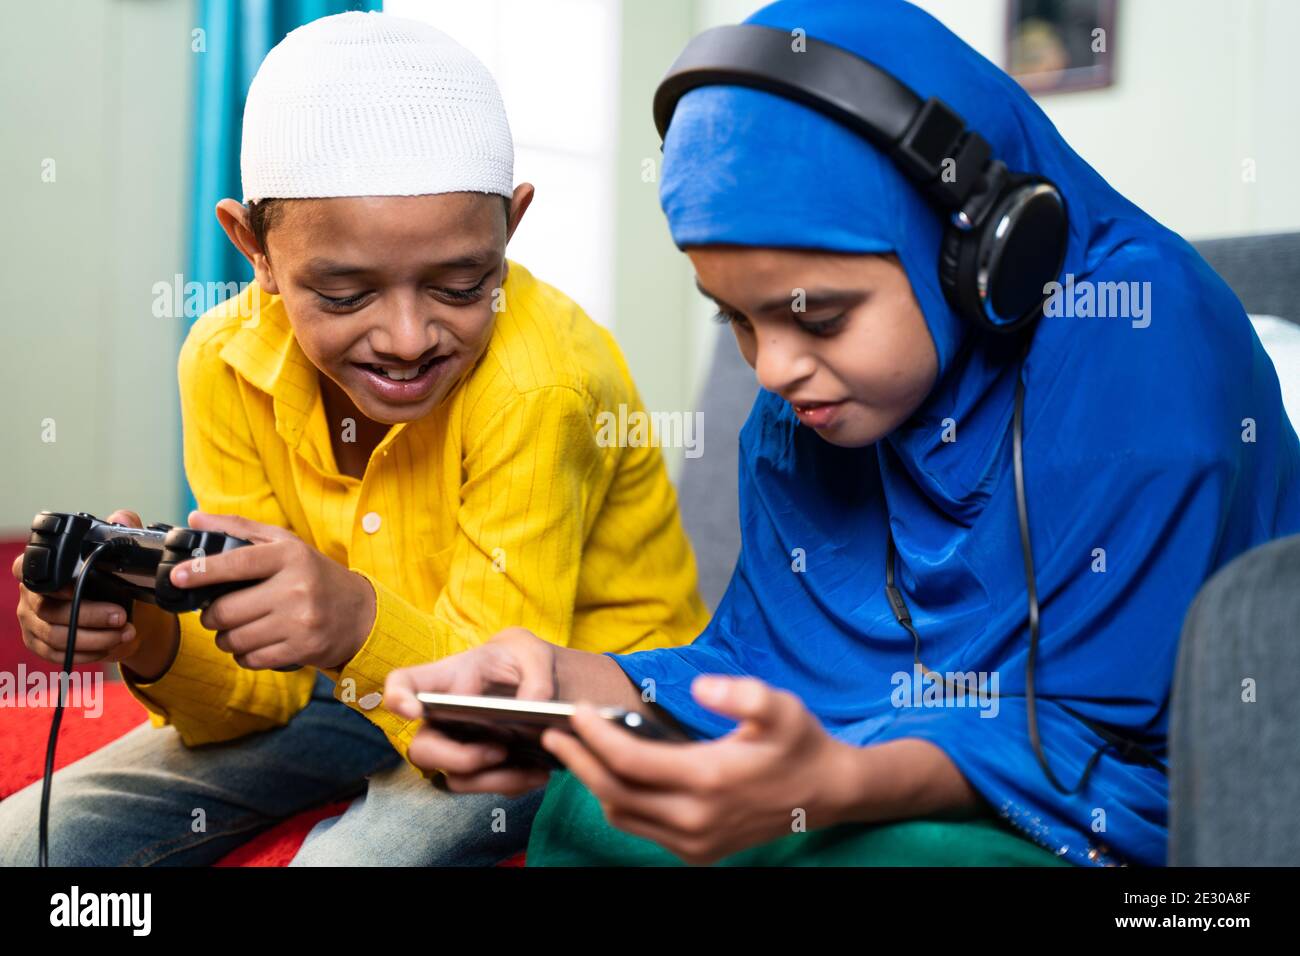 Concept of Kids busy with modern day technology lifestyle and distraction - Two muslim siblings, Brother playing game using joystick and sister playin Stock Photo